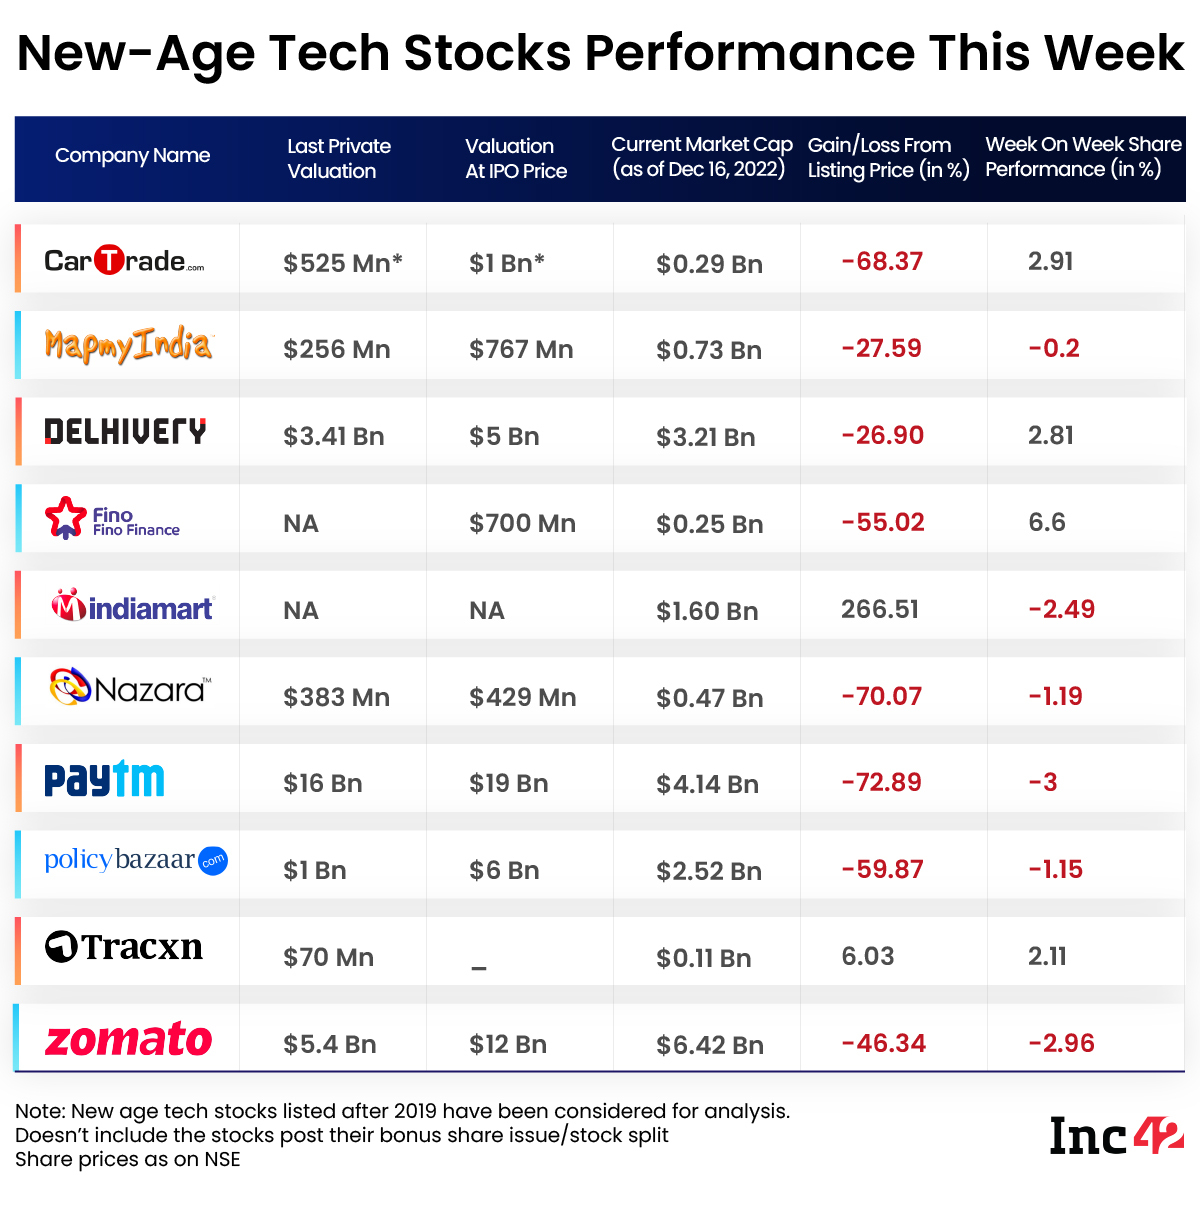 new-age tech stocks weekly performance